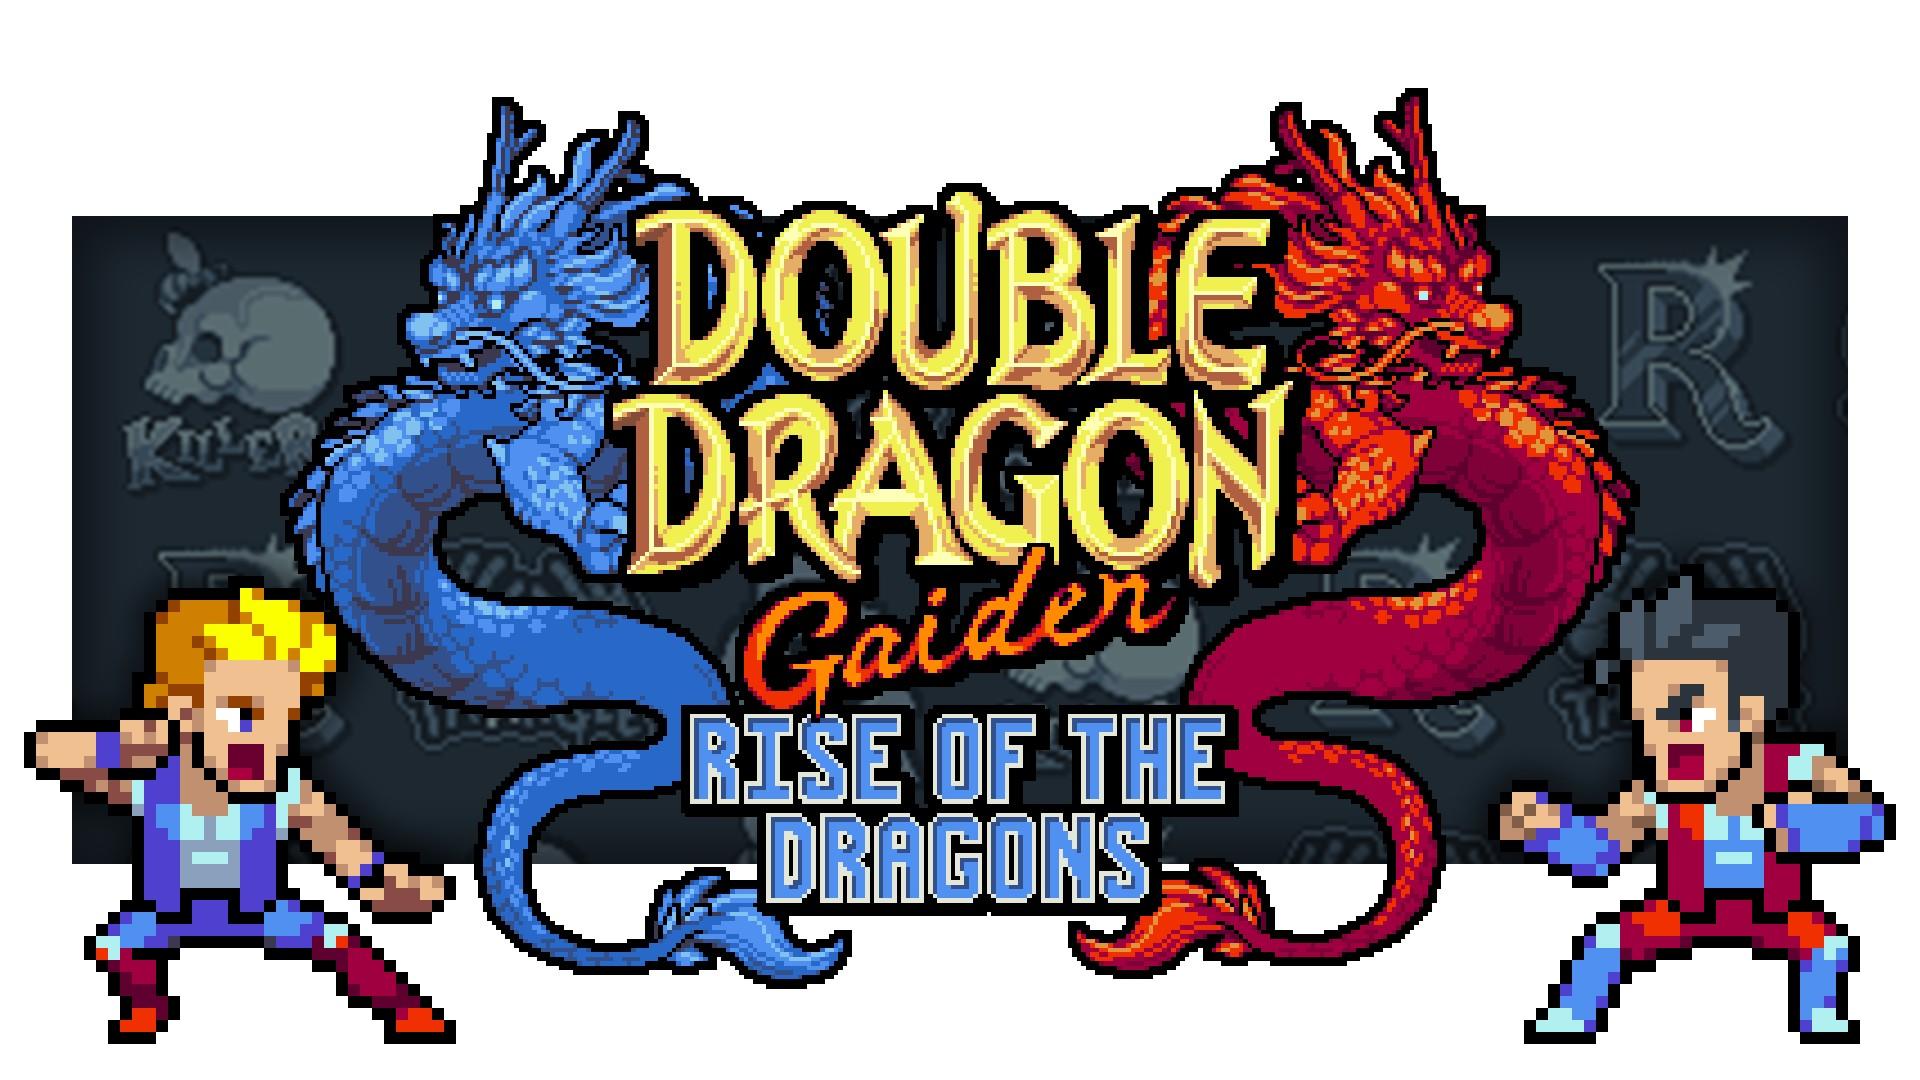 Review: Double Dragon Gaiden: Rise of the Dragons brings the Lee boys back  to town - Entertainium